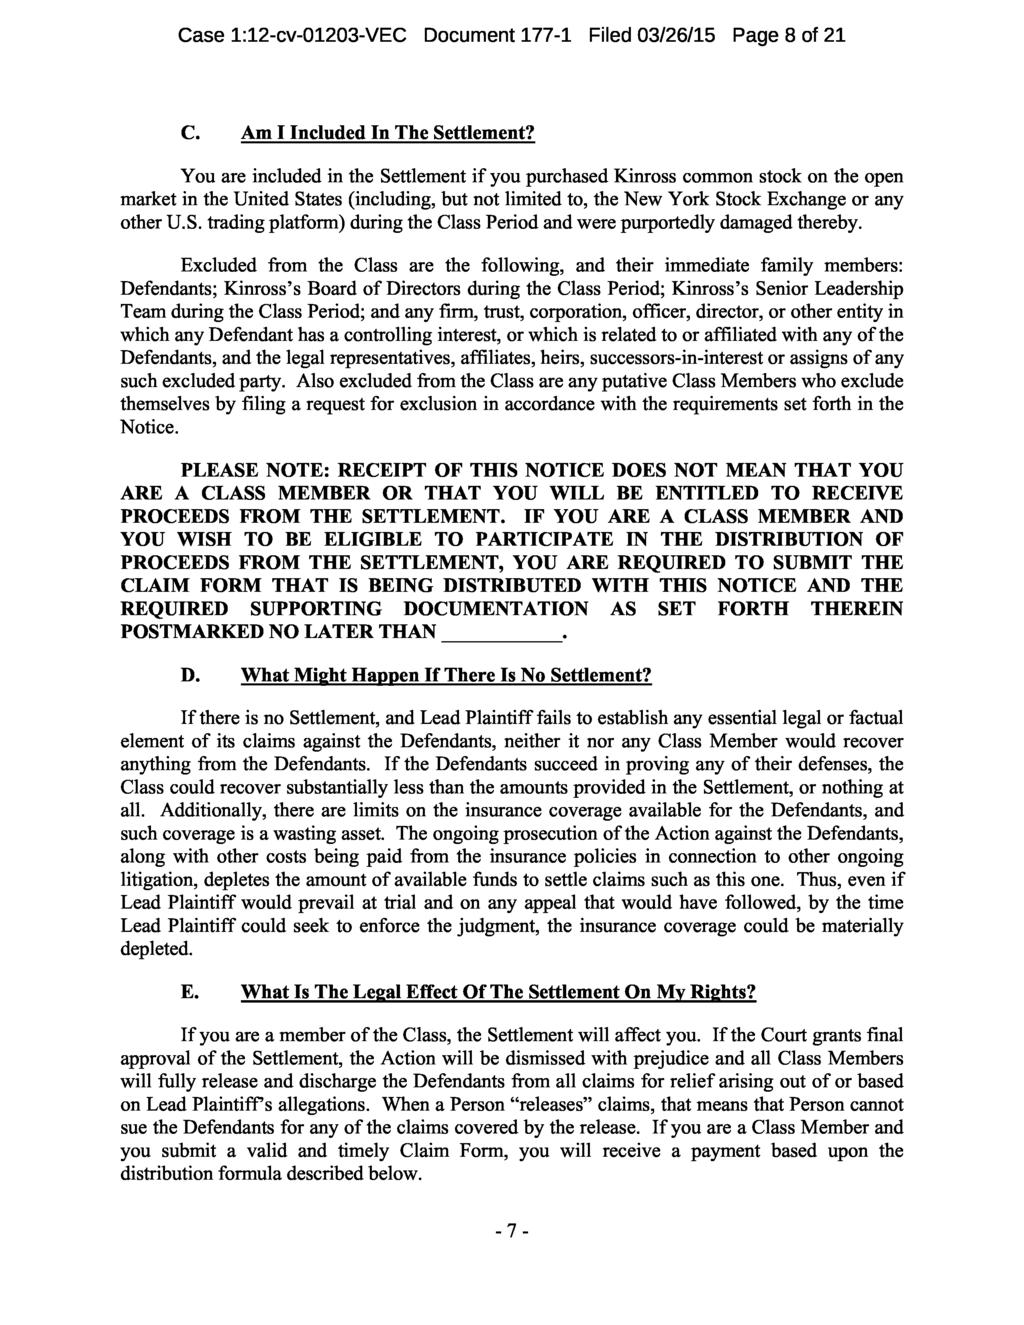 Case 1:12-cv-01203-VEC Document 177-1 Filed 03/26/15 Page 8 of 21 C. Am I Included In The Settlement?